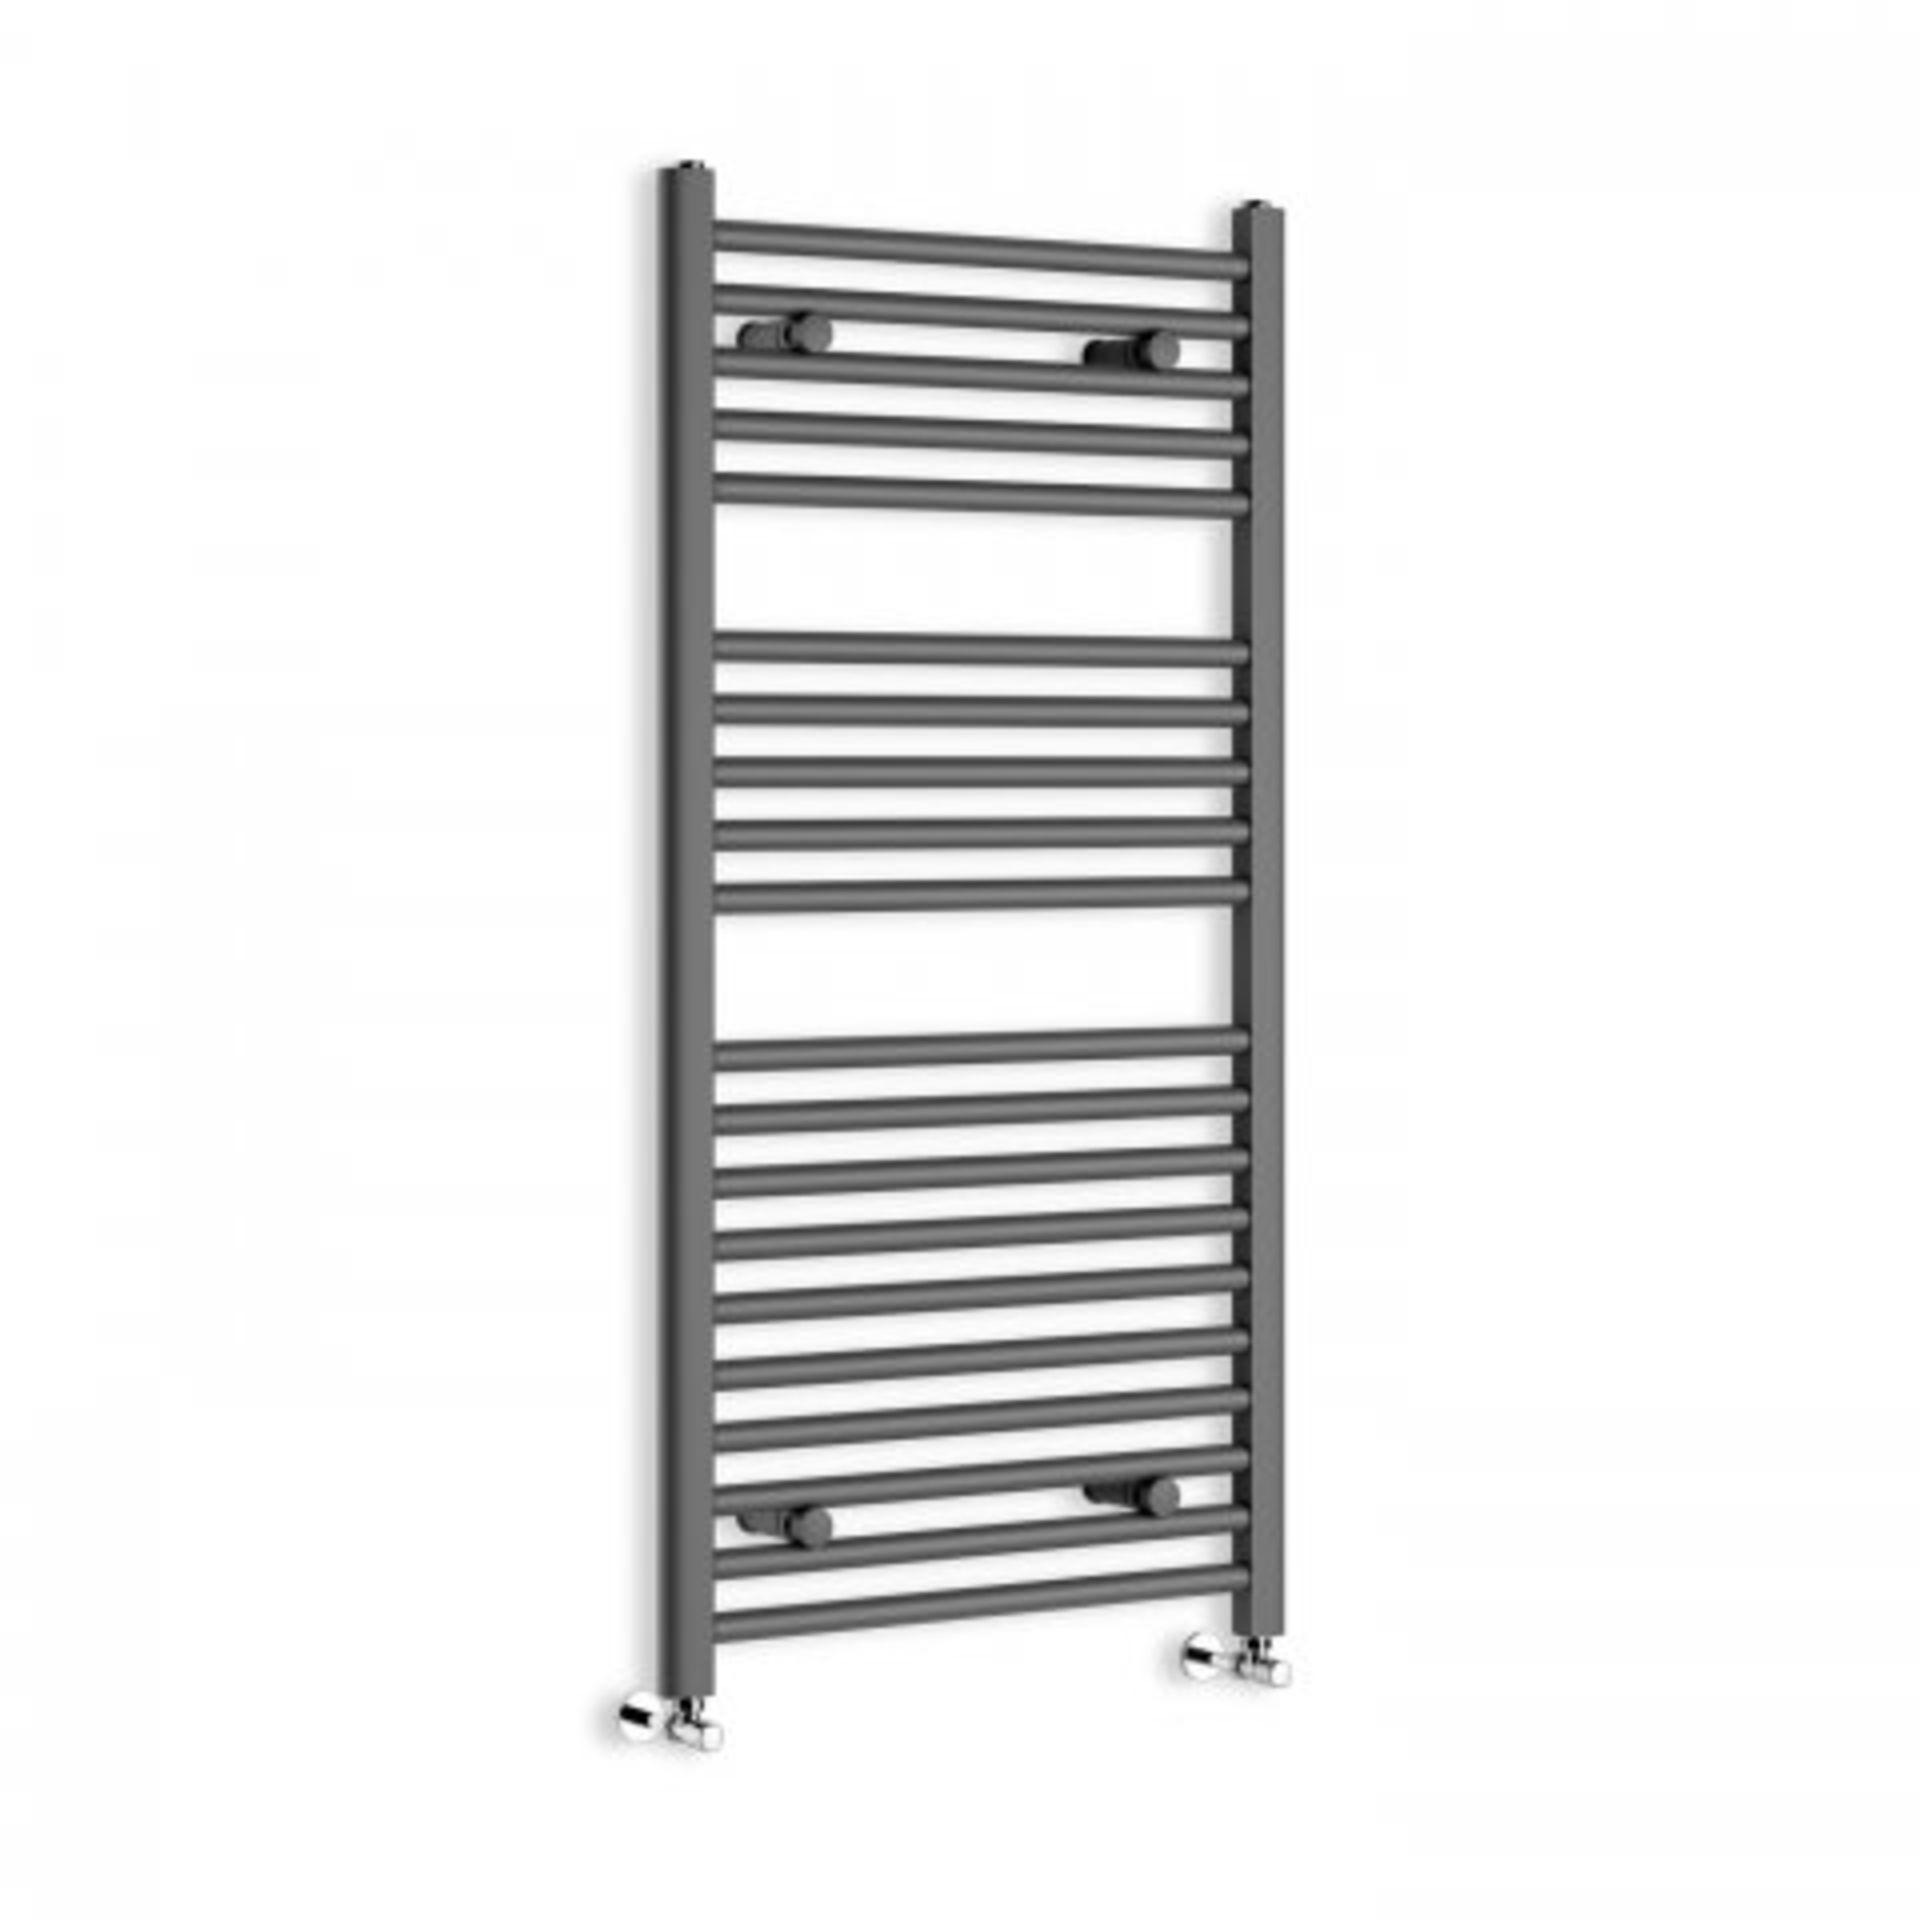 (H184) 1200x600mm - 25mm Tubes - Anthracite Heated Straight Rail Ladder Towel Radiator. RRP £249.98. - Image 3 of 3